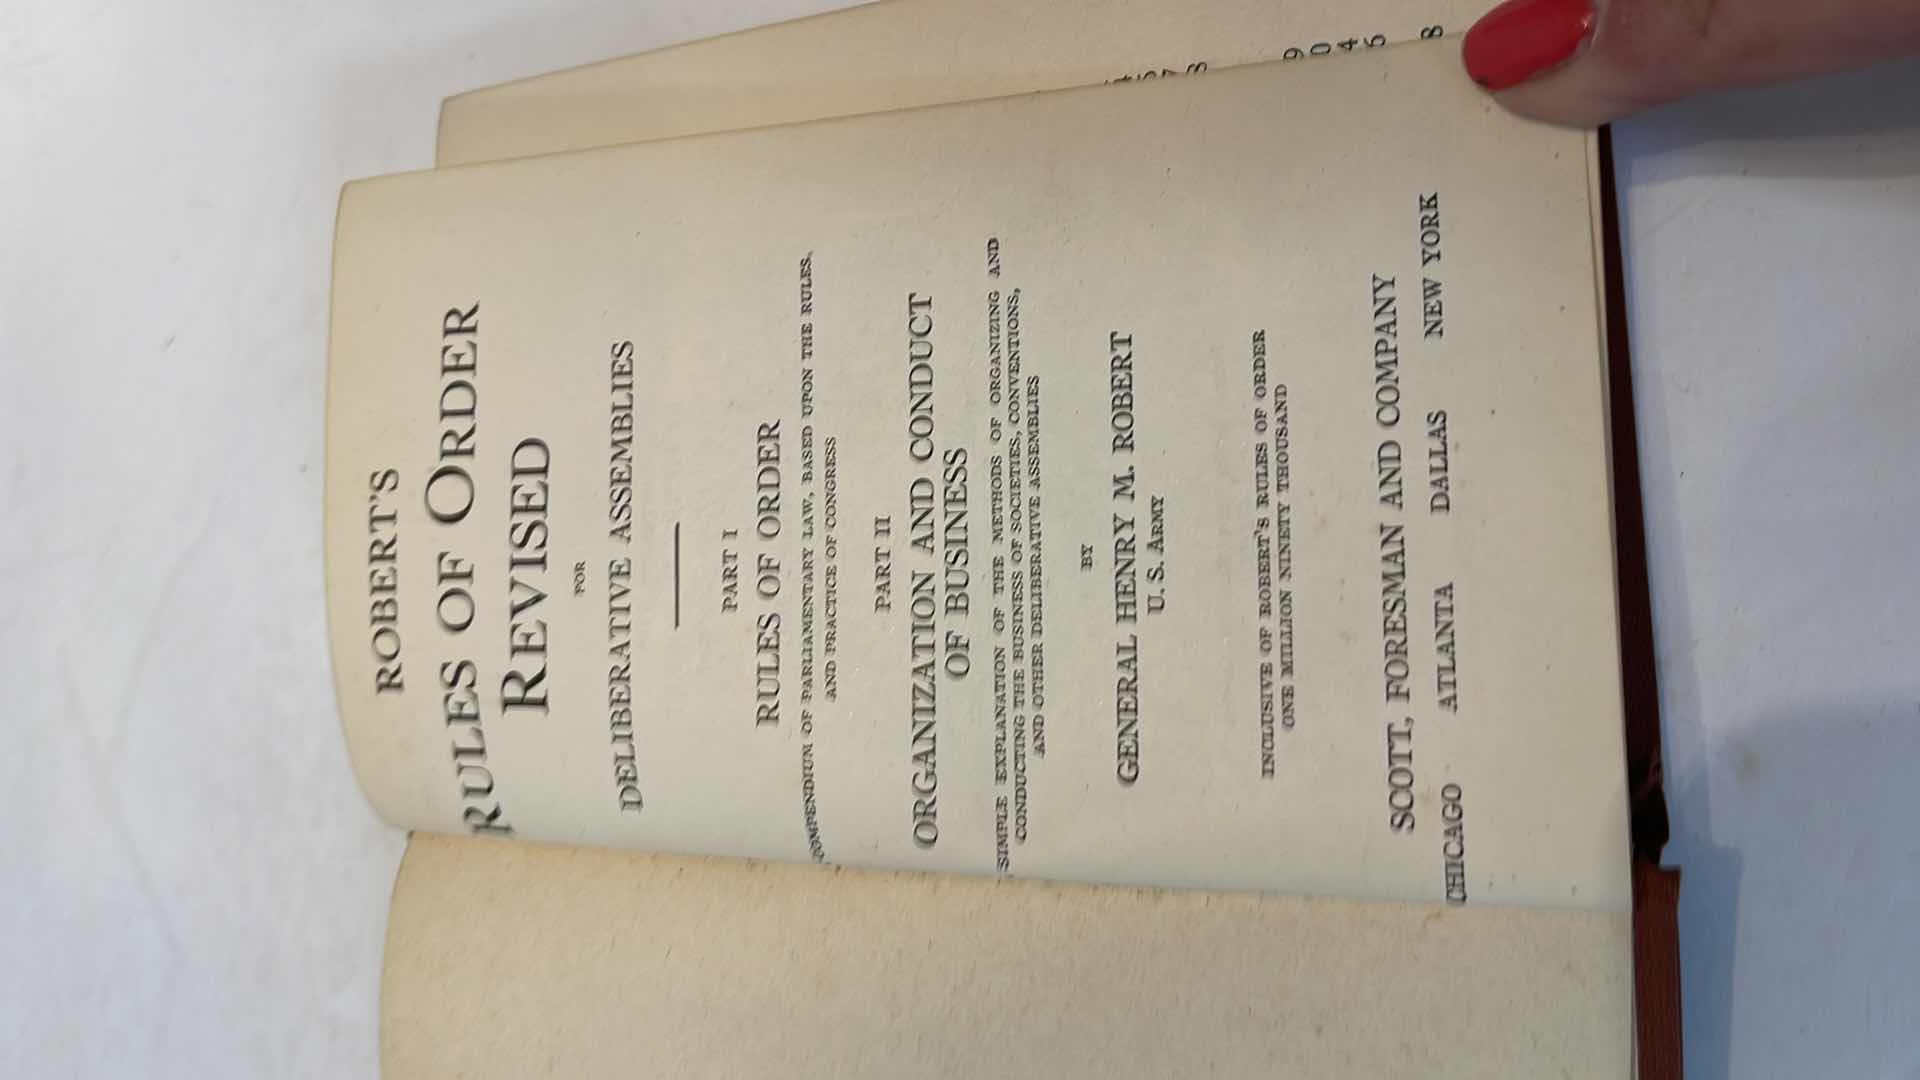 Photo 2 of VINTAGE ROBERTS "RULES OF ORDER" REVISED BOOK